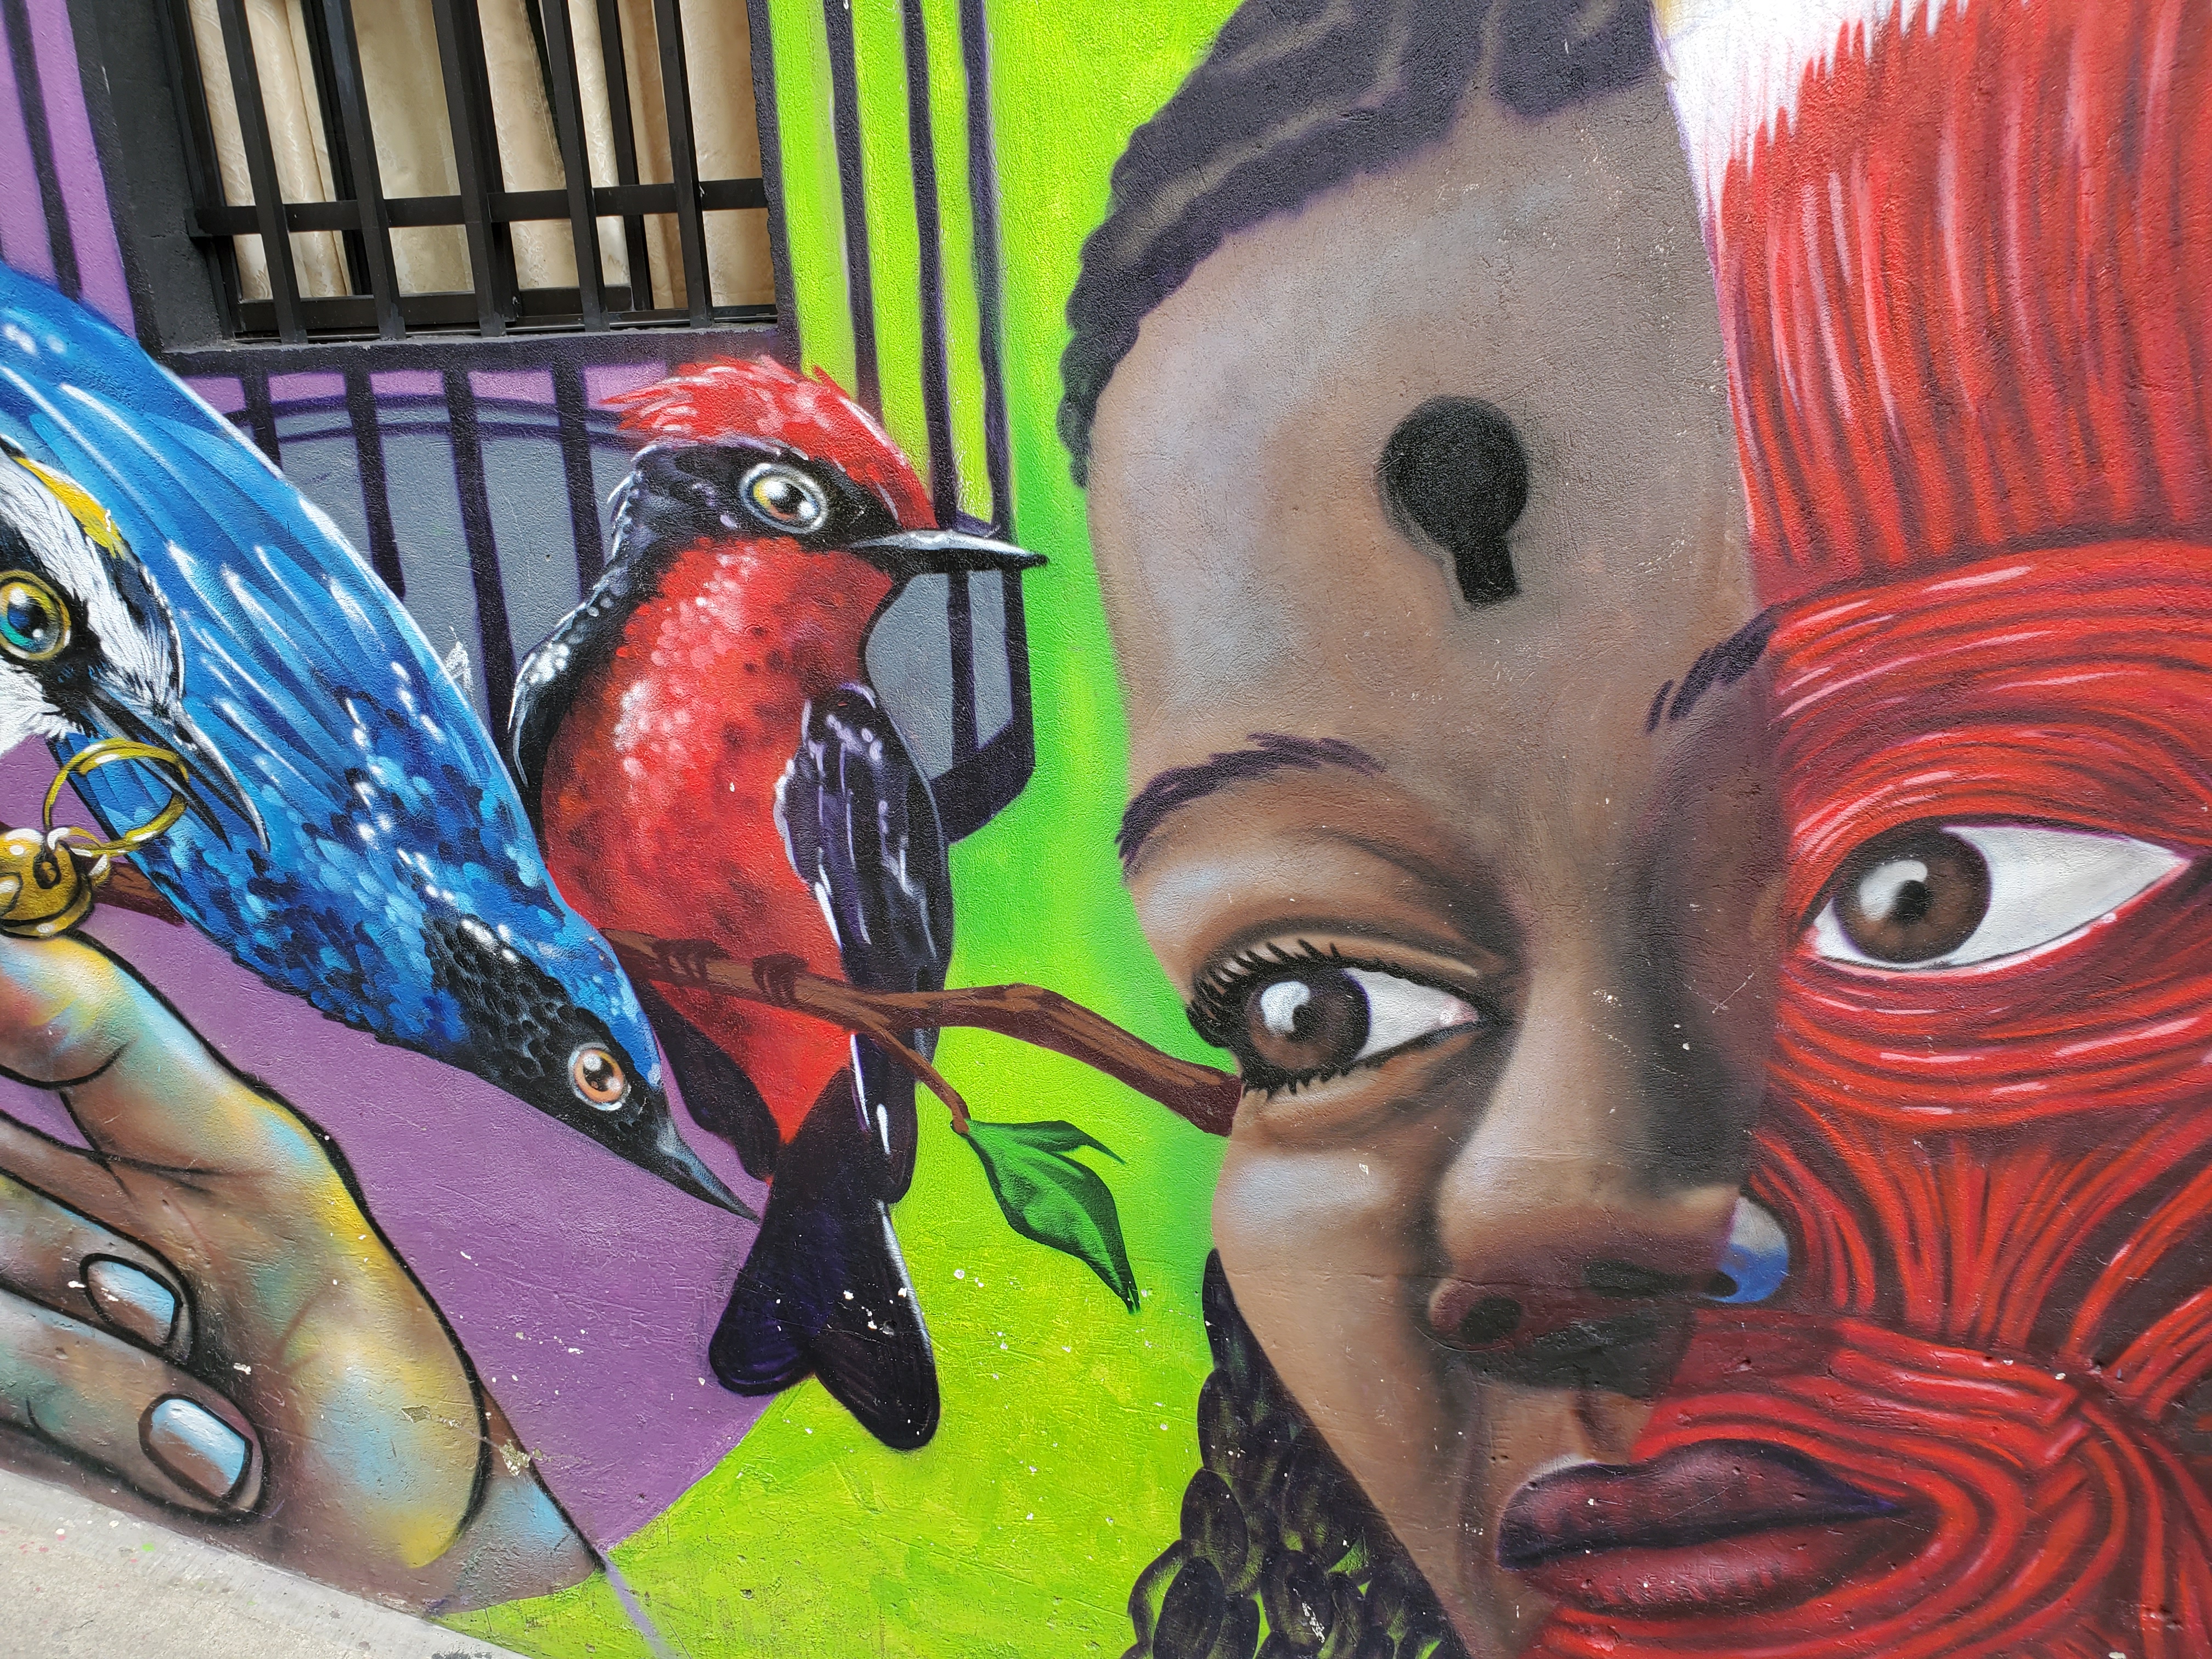 Birds, a symbol of peace, are a common sight along murals